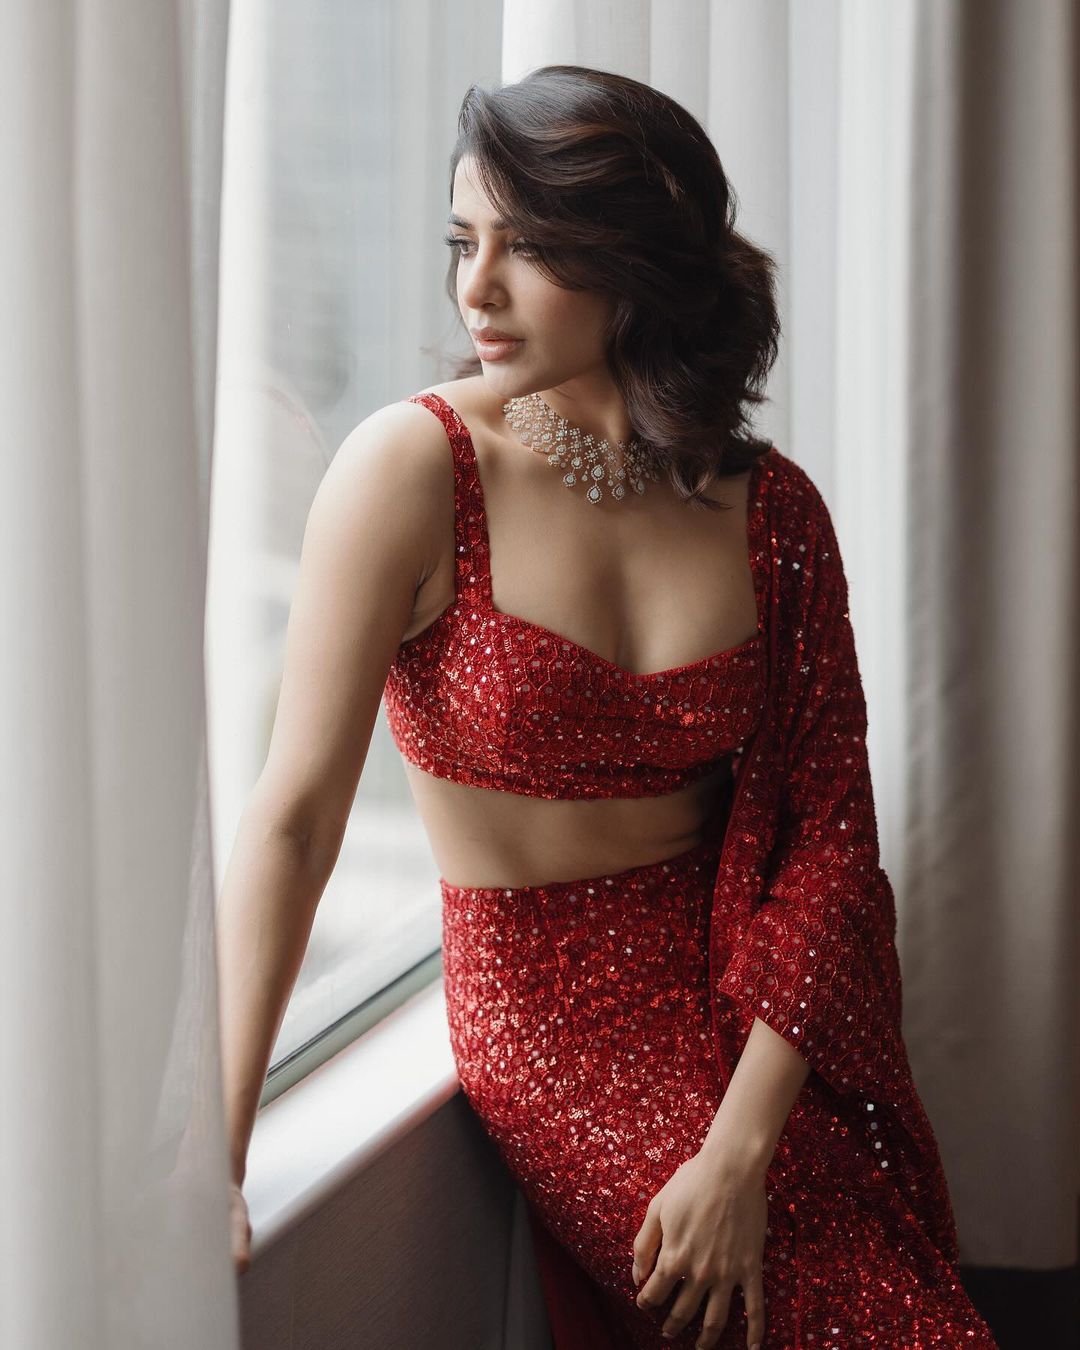 Samantha Ruth Prabhu's Red Sequin Saree Spectacle: Glitter, Glam, and a Whole Lot of Sass!